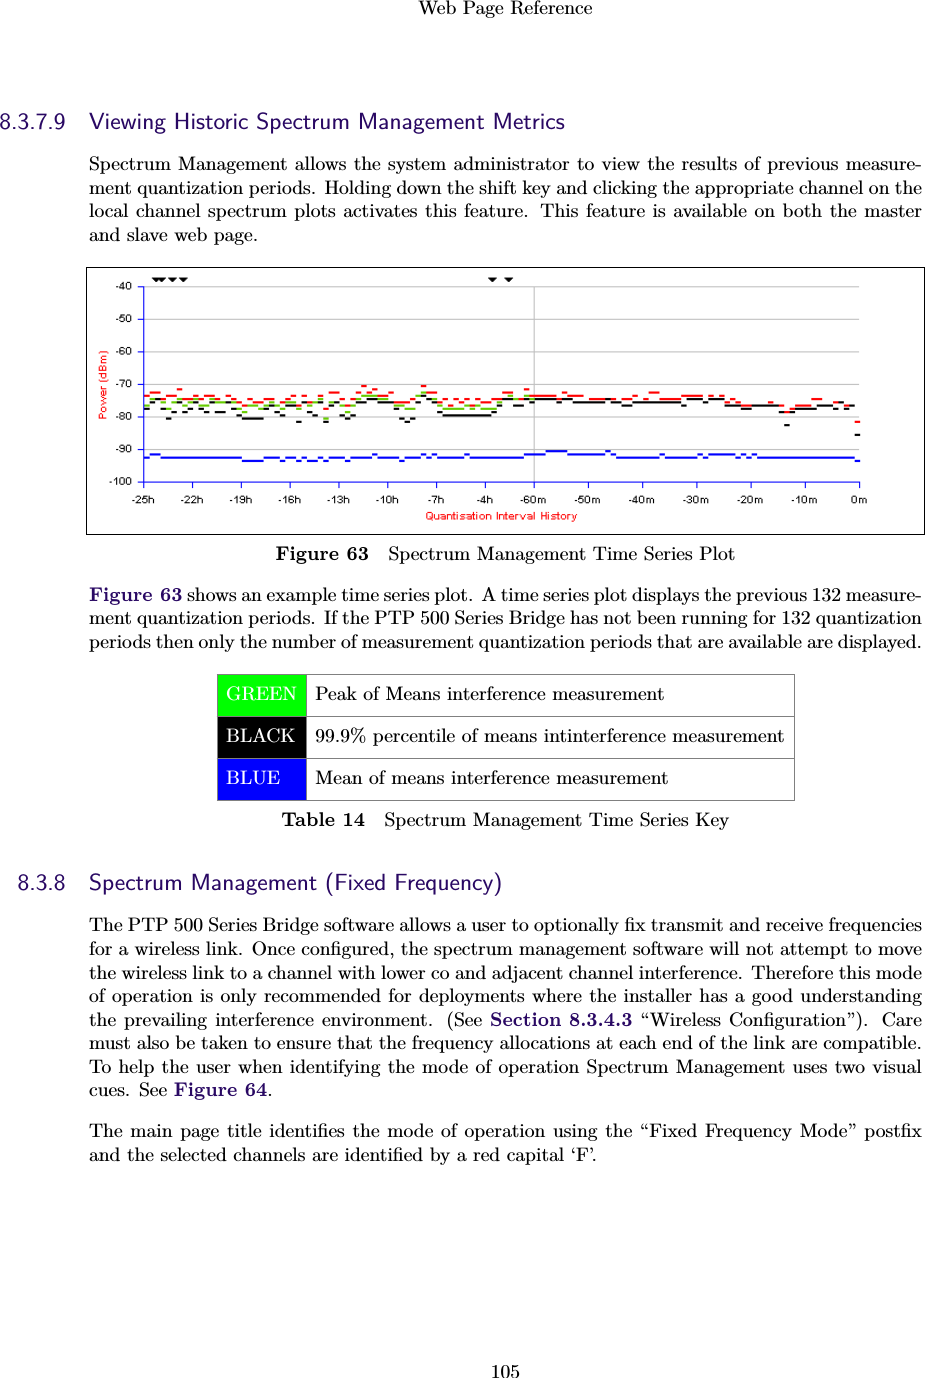 Web Page Reference1058.3.7.9 Viewing Historic Spectrum Management MetricsSpectrum Management allows the system administrator to view the results of previous measure-ment quantization periods. Holding down the shift key and clicking the appropriate channel on thelocal channel spectrum plots activates this feature. This feature is available on both the masterand slave web page.Figure 63 Spectrum Management Time Series PlotFigure 63 shows an example time series plot. A time series plot displays the previous 132 measure-ment quantization periods. If the PTP 500 Series Bridge has not been running for 132 quantizationperiods then only the number of measurement quantization periods that are available are displayed.GREEN Peak of Means interference measurementBLACK 99.9% percentile of means intinterference measurementBLUE Mean of means interference measurementTable 14 Spectrum Management Time Series Key8.3.8 Spectrum Management (Fixed Frequency)The PTP 500 Series Bridge software allows a user to optionally ﬁx transmit and receive frequenciesfor a wireless link. Once conﬁgured, the spectrum management software will not attempt to movethe wireless link to a channel with lower co and adjacent channel interference. Therefore this modeof operation is only recommended for deployments where the installer has a good understandingthe prevailing interference environment. (See Section 8.3.4.3 “Wireless Conﬁguration”). Caremust also be taken to ensure that the frequency allocations at each end of the link are compatible.To help the user when identifying the mode of operation Spectrum Management uses two visualcues. See Figure 64.The main page title identiﬁes the mode of operation using the “Fixed Frequency Mode” postﬁxand the selected channels are identiﬁed by a red capital ‘F’.